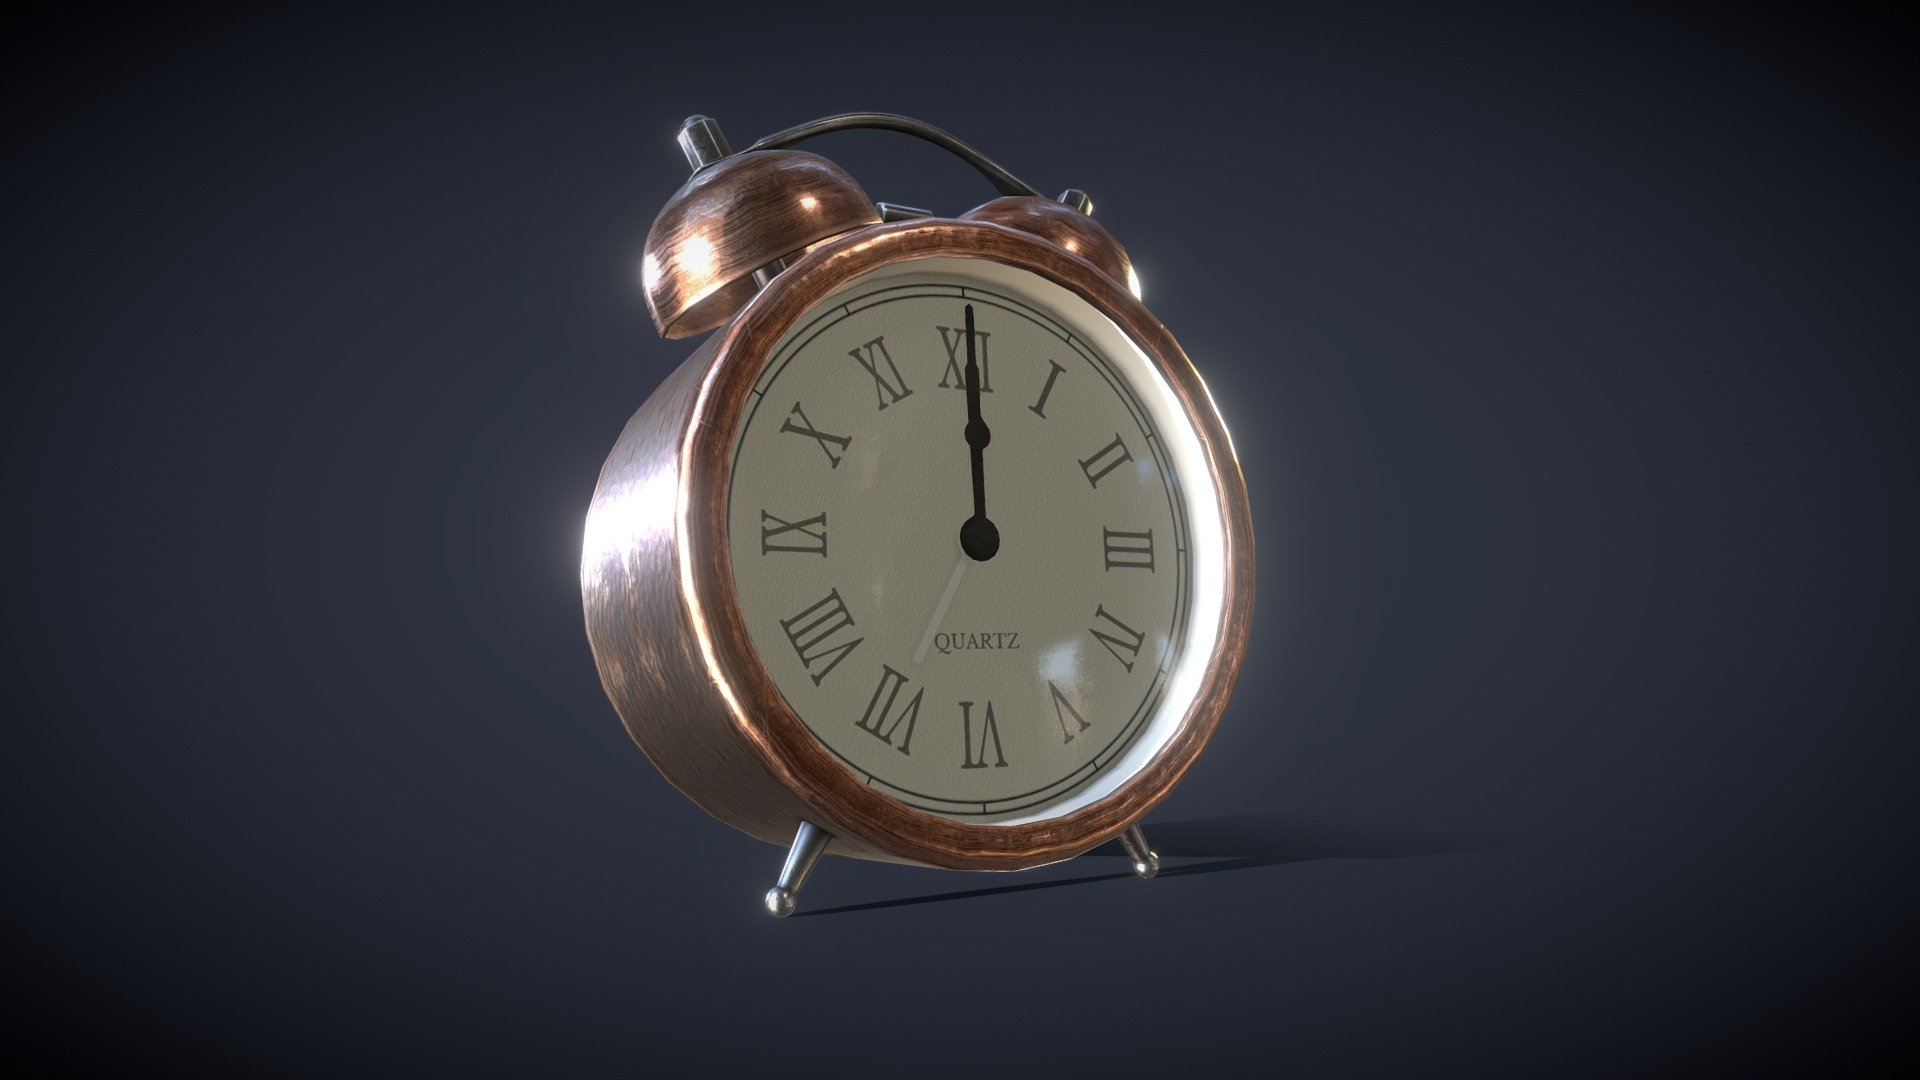 Animated Vintage Alarm Clock



All quad design.

All Textures created in Substance Painter and exported in 2K PBR formats.

Optimised mesh, all unnecessary edge loops removed.

Game ready - High poly game.

Logically named objects, materials and textures.

Modelled in Blender 2.83.

Textured in Substance Painter 2020.1.3.

Subdivision ready (As shown in renders and 3D view).

Animated Hands (at 30fps, 300 frames, 10 seconds to complete a 12 Hour cycle).

Aditional .Blend file includes a full 12 hour animation with ticking second hand.

Highly detailed textures.

modelled to real world scales,

AlarmClock - 10.8cm tall, 8cm wide, 5.18cm deep

Fully and efficiently UV unwrapped.

Textures included in .png format.

Alarmclock - 2K -




Diffuse

Roughness

Normal - (OpenGL Unity standard, Invert green channel to convert to DirectX Unreal standard)

Metallic

Alpha
 - Animated Vintage Alarm Clock - Buy Royalty Free 3D model by PBR3D 3d model